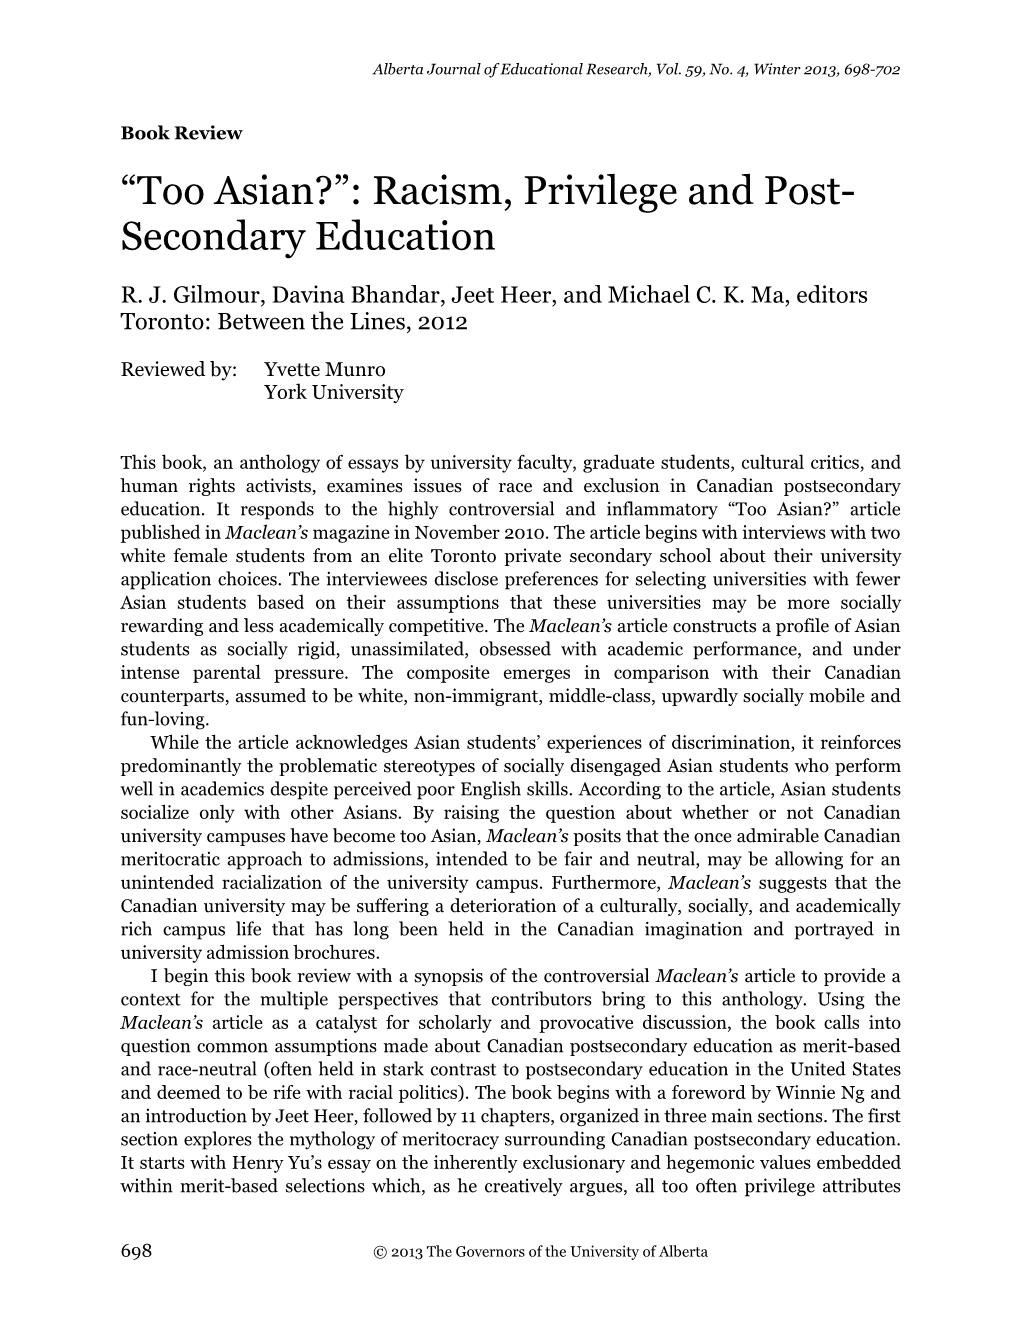 “Too Asian?”: Racism, Privilege and Post- Secondary Education